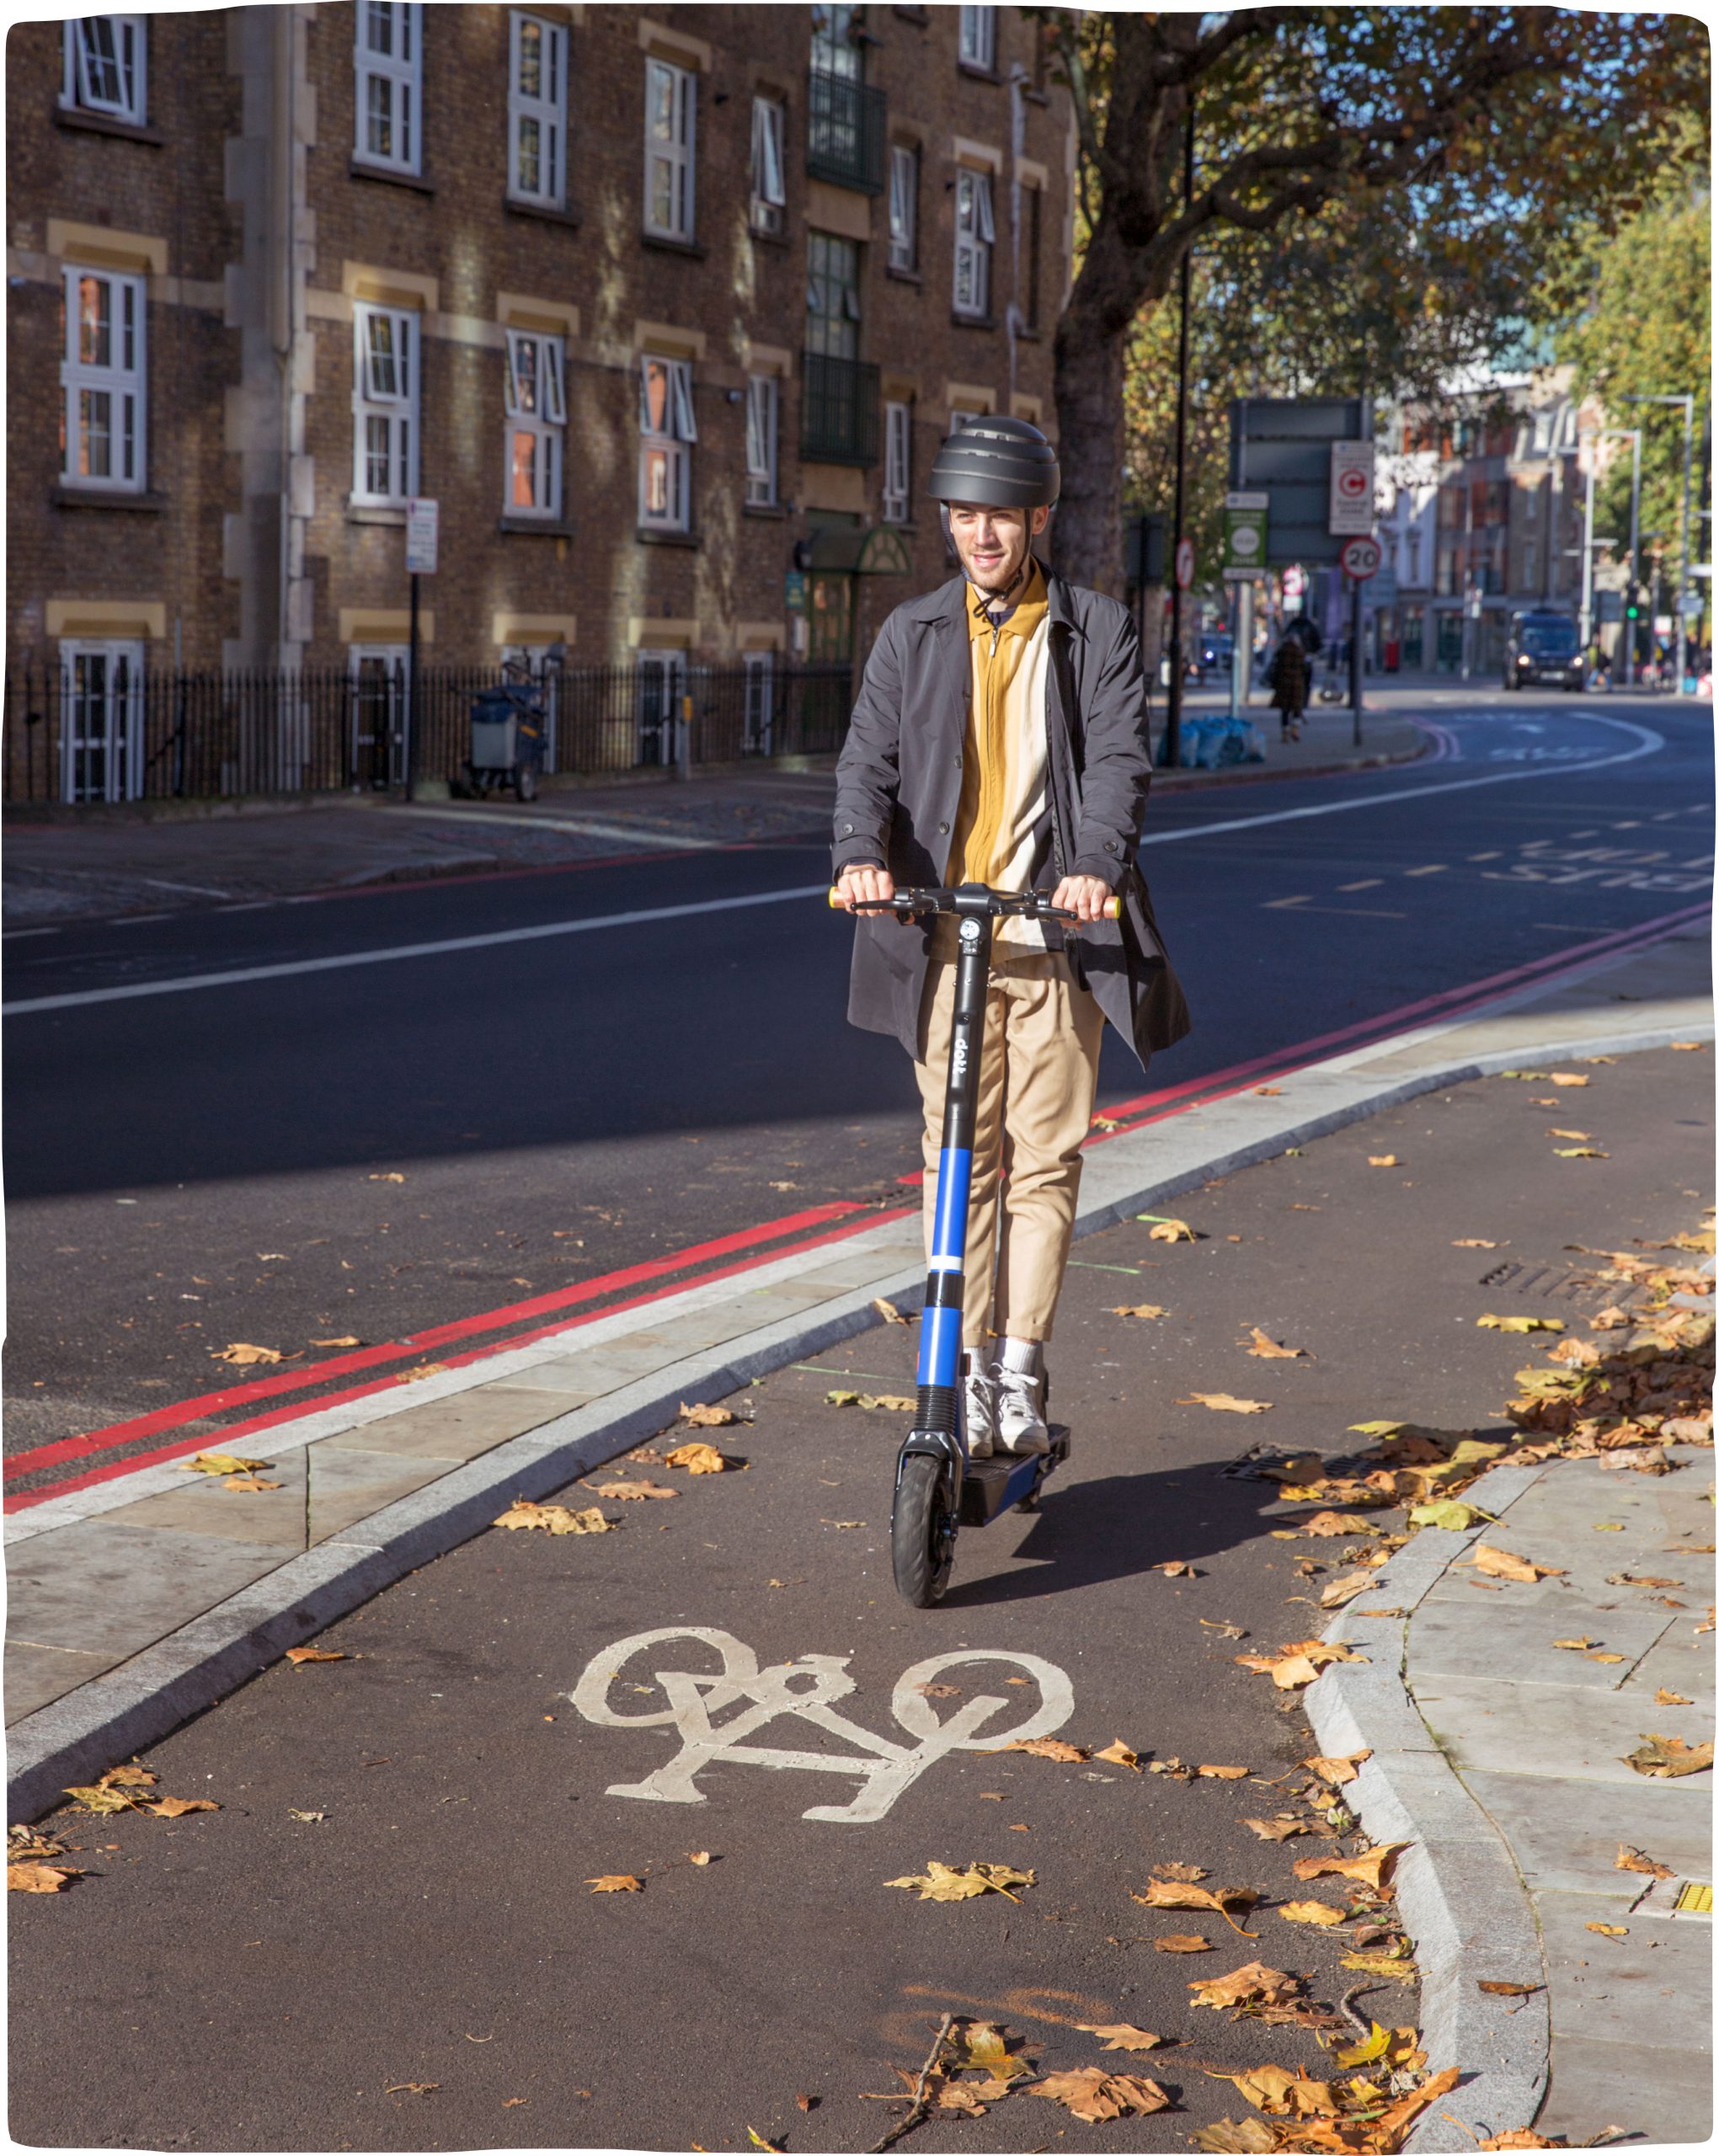 A man wearing a helmet and riding an e-scooter in a bicycle lane on a sunny autumn day in London.